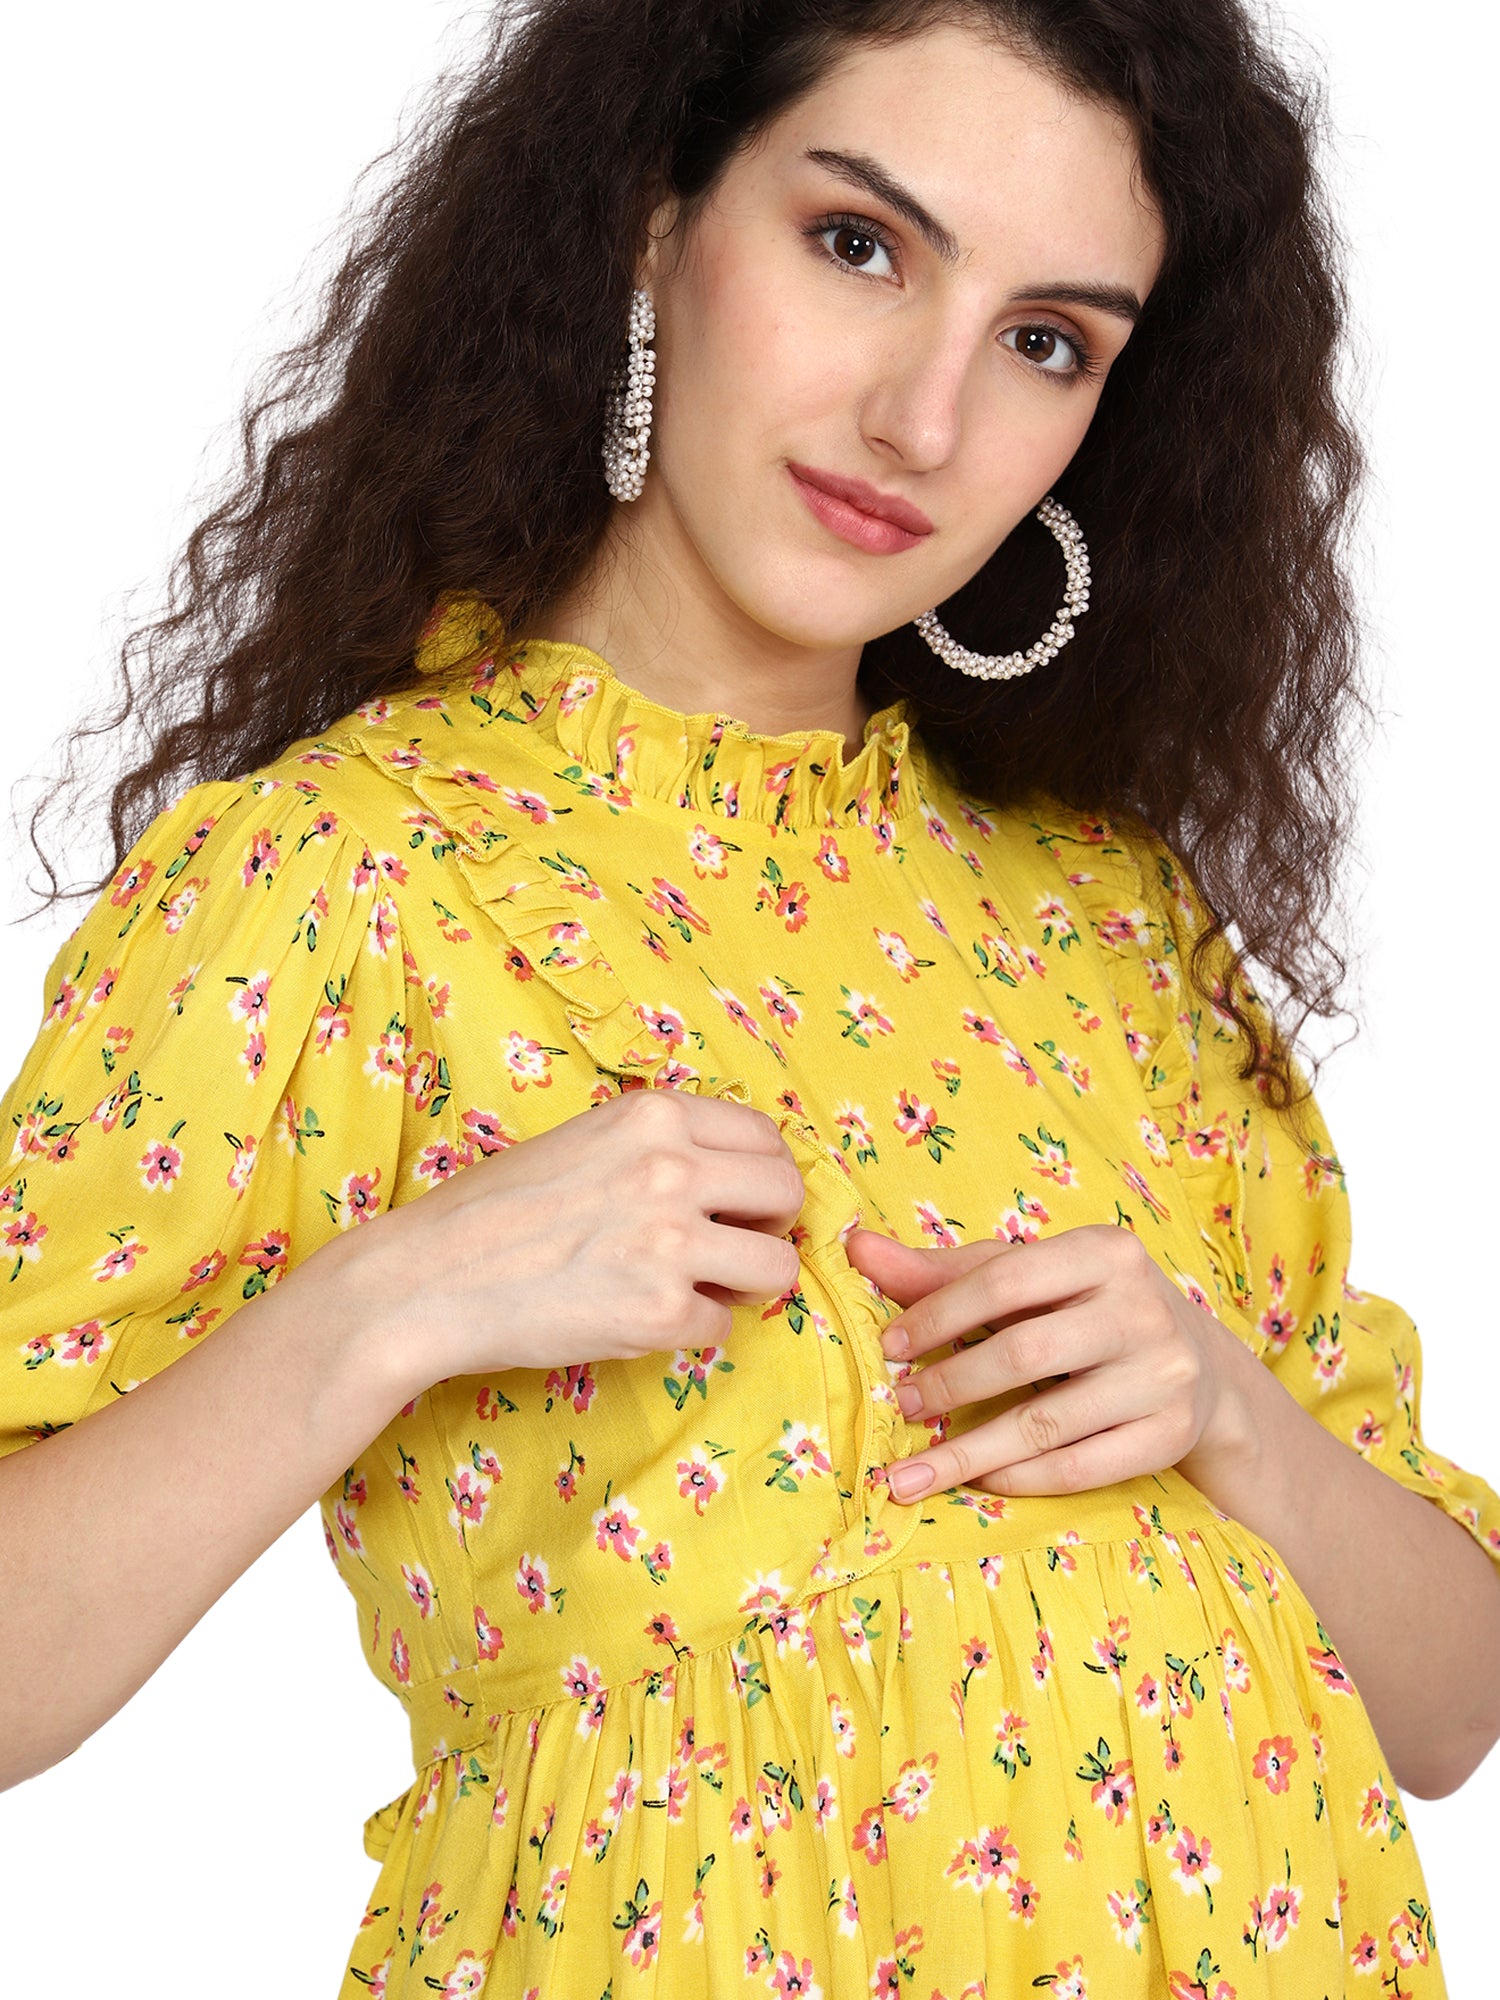 Fit and Flare Yellow Maternity Top